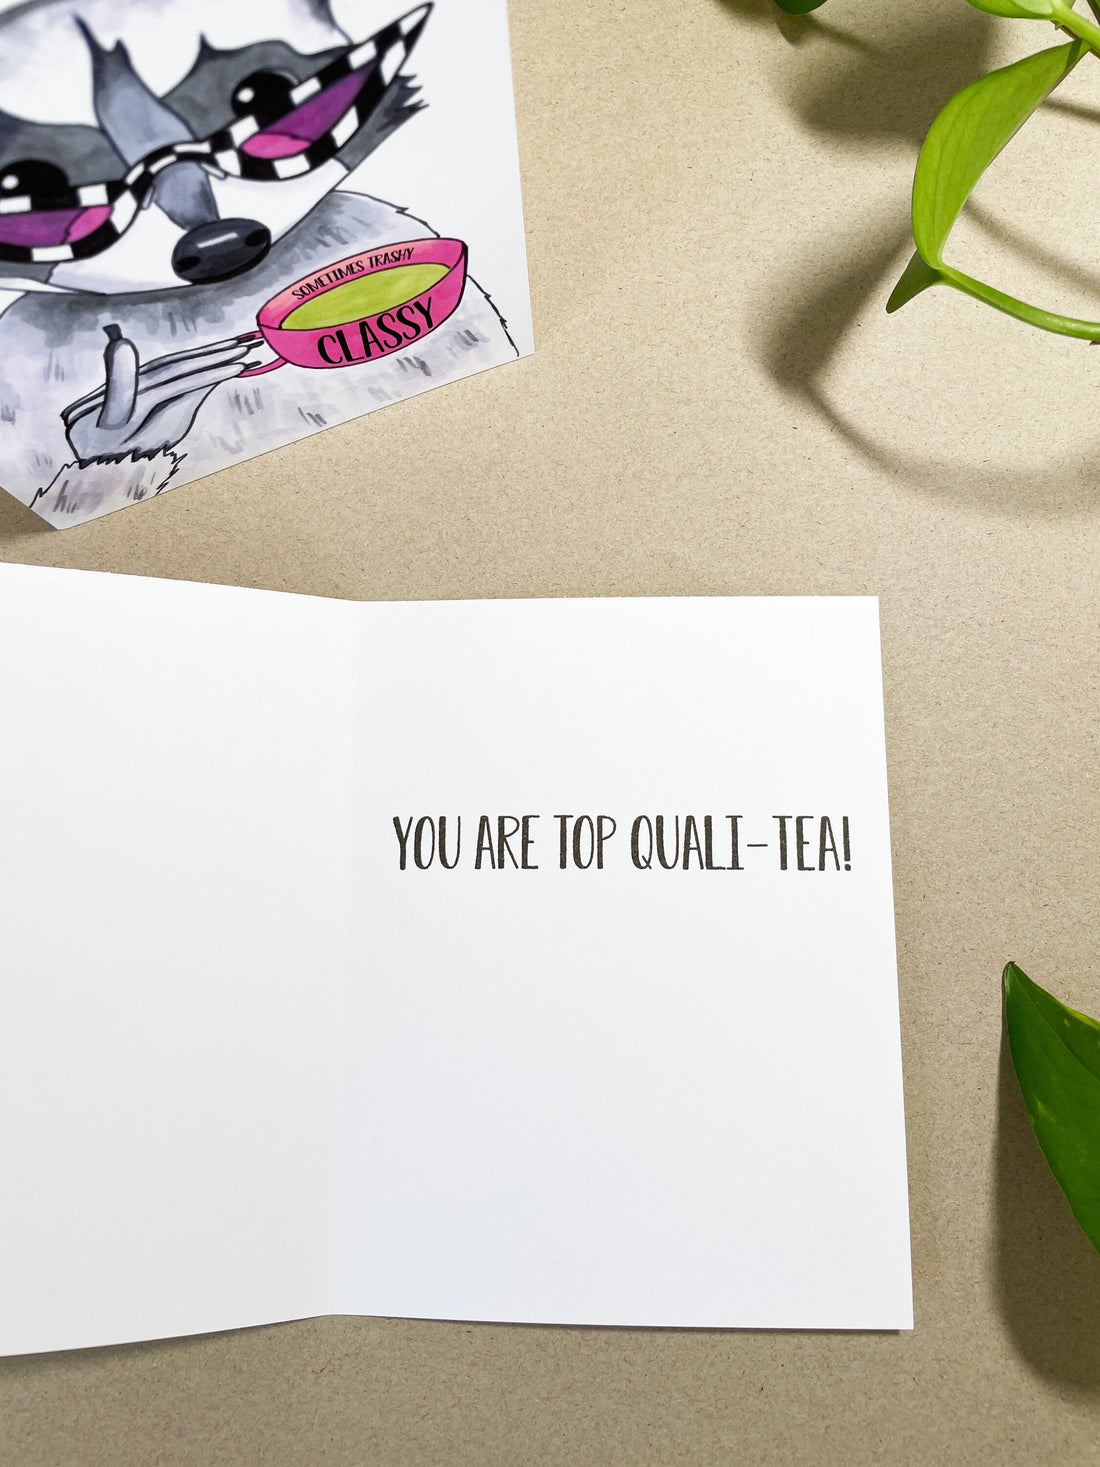 Greeting Cards by Quirky Burp